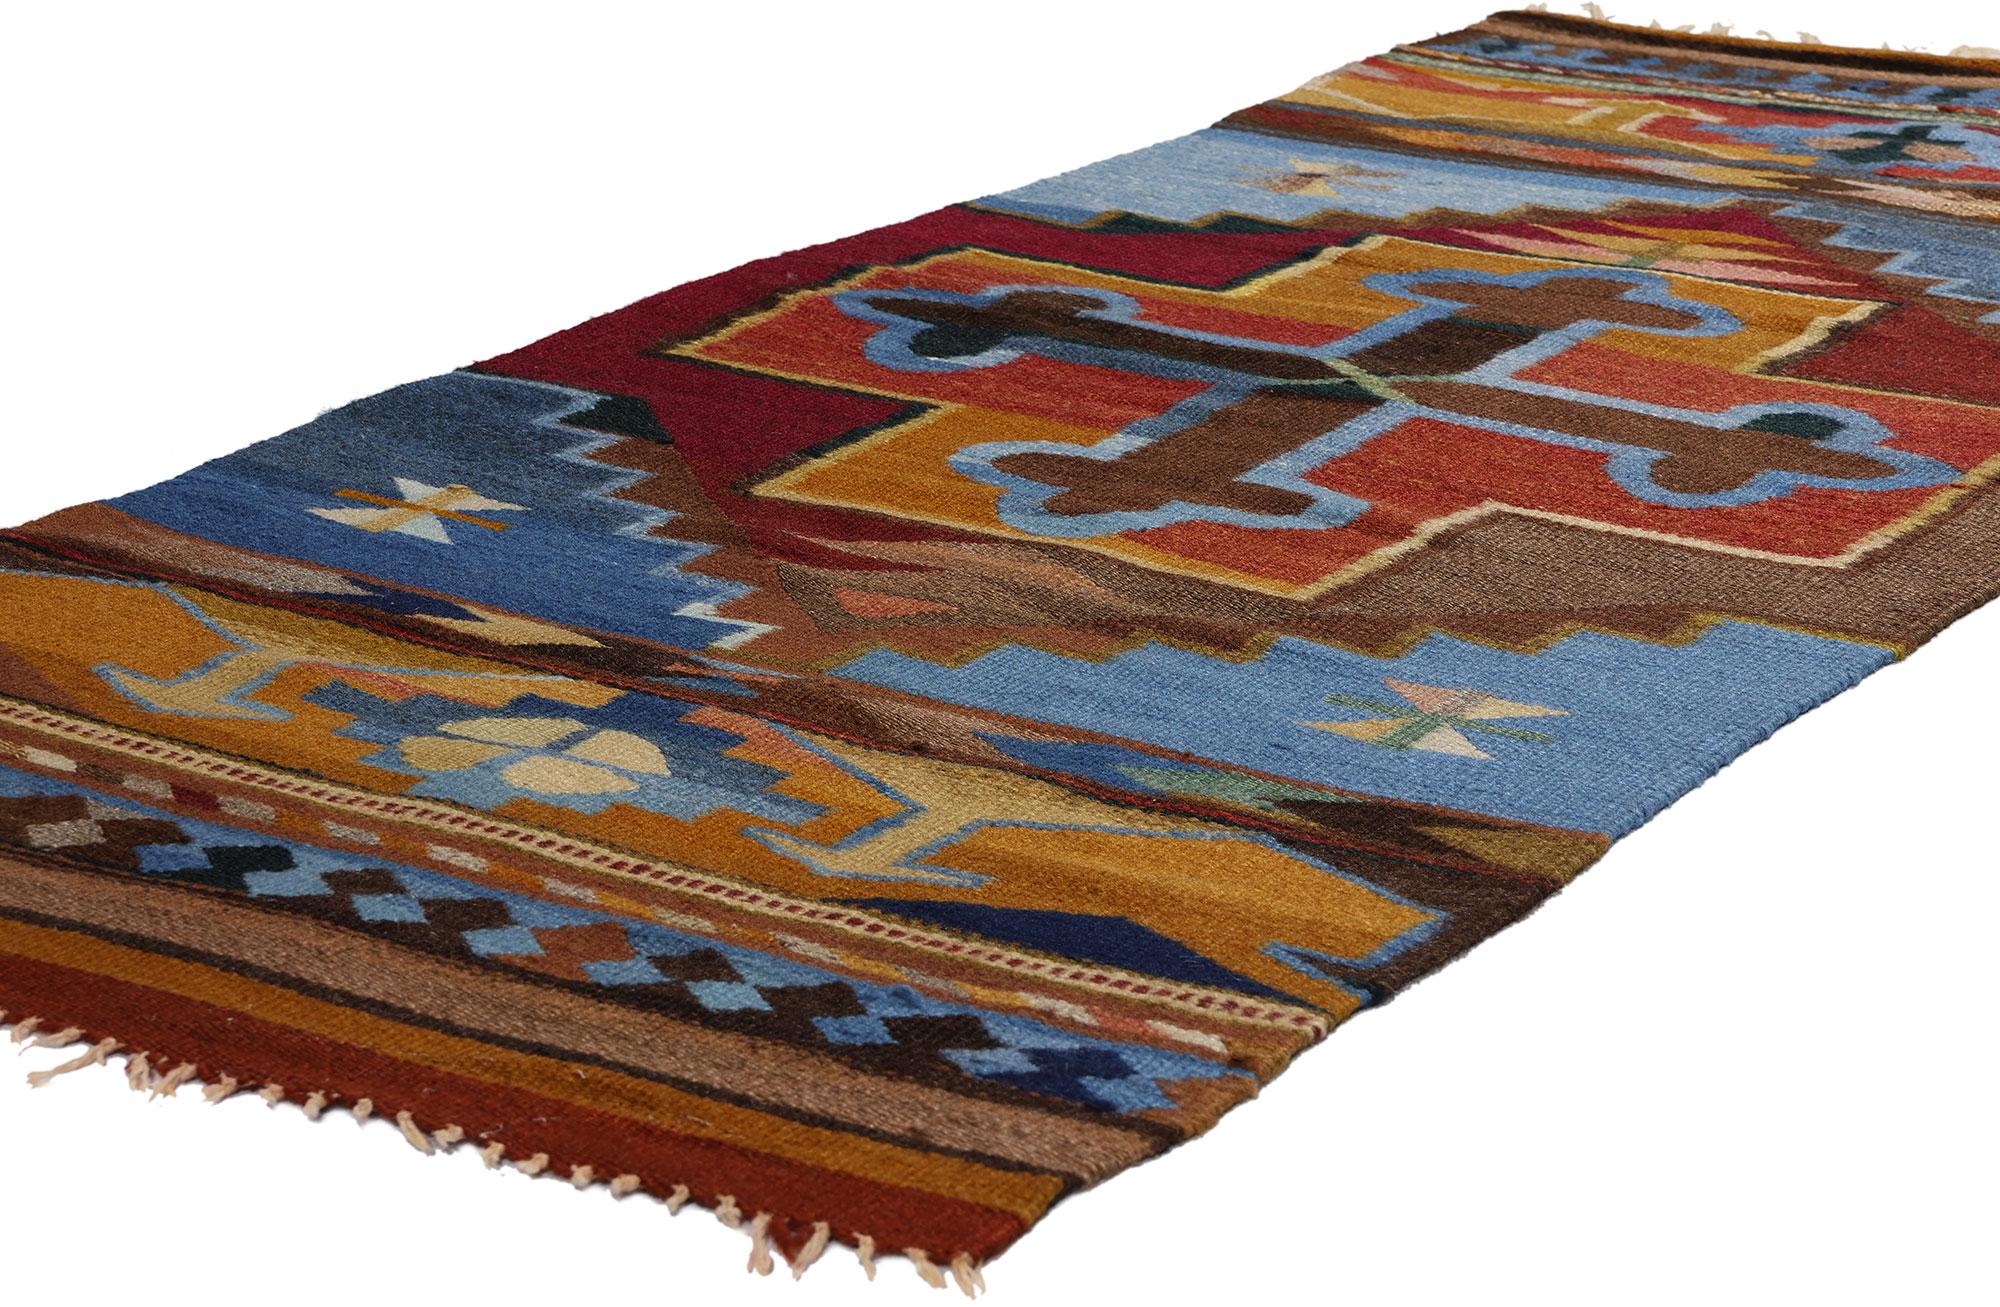 78720 Vintage Turkish Kilim Rug, 02'06 x 06'01. Originating from Turkey, kilim rugs are crafted using a unique technique that results in a flat surface without a distinct pile. Typically made from wool, Turkish kilims feature intricate and colorful